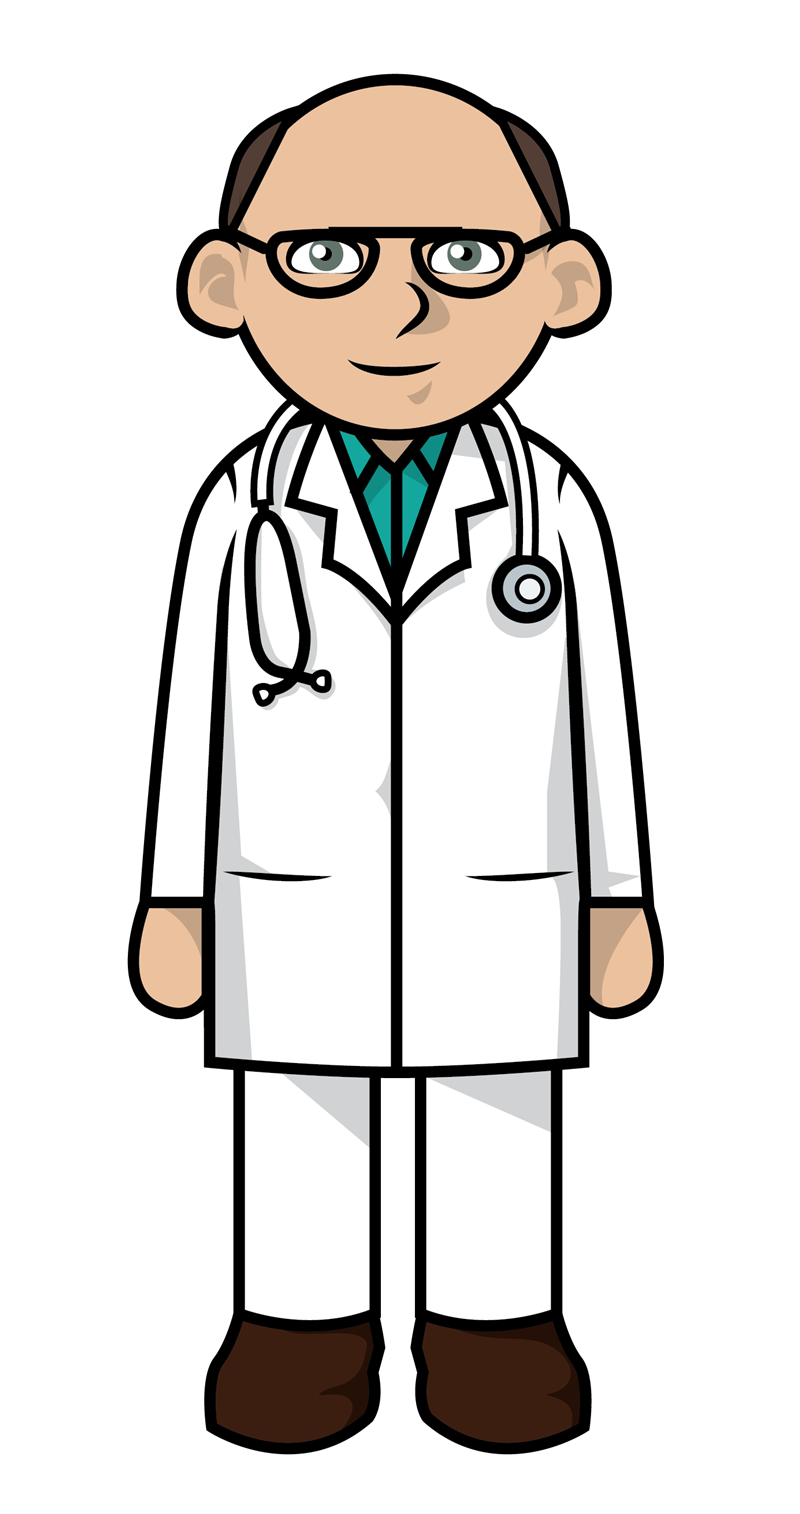 Searching for a doctor clip art for use on your projects? Stop you search here as you can use this old doctor clip art on your personal or commercial ...